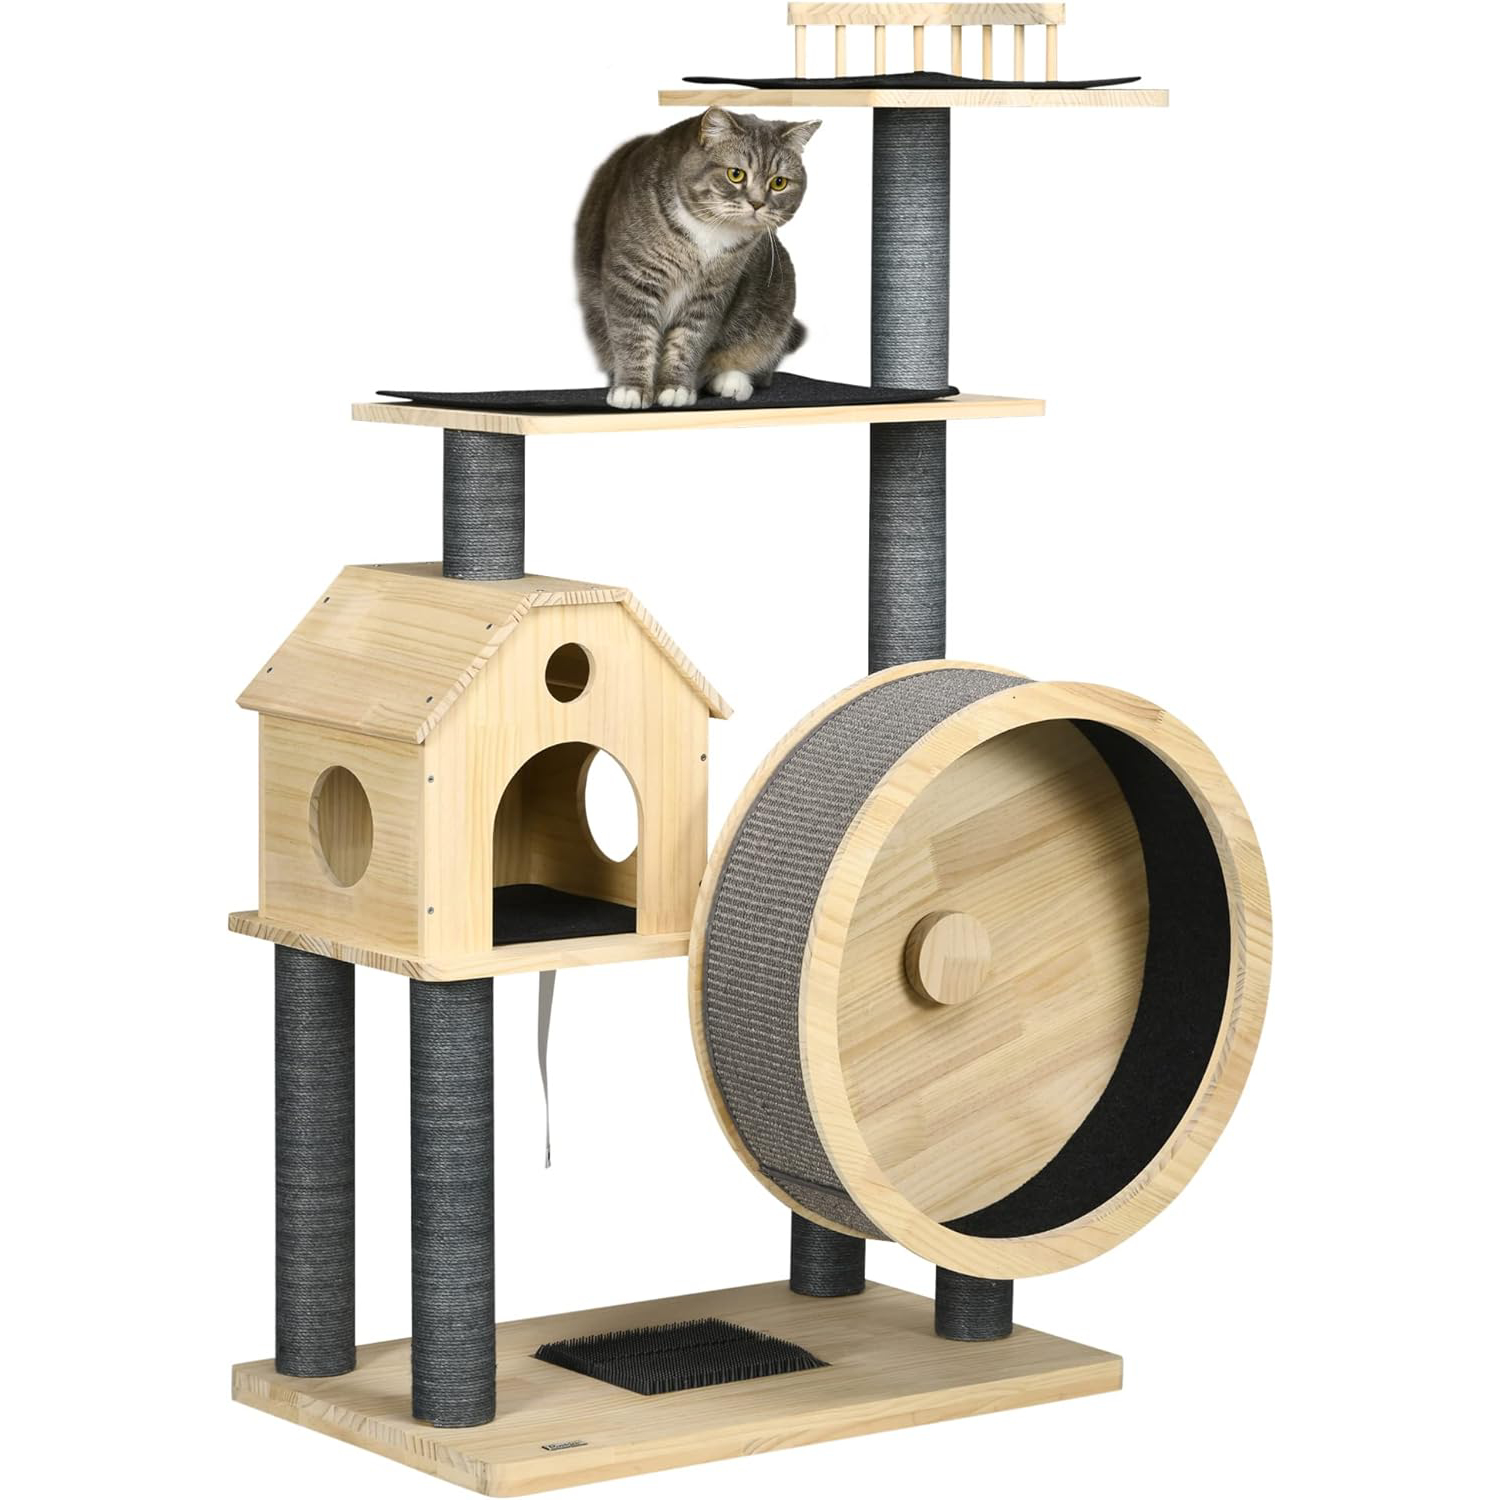 PawHut 56 Cat Tree Activity Condo Luxury Pine Wood with Hamster Wheel Sisal Scratching Posts Elevated Perches & Roomy Interior New